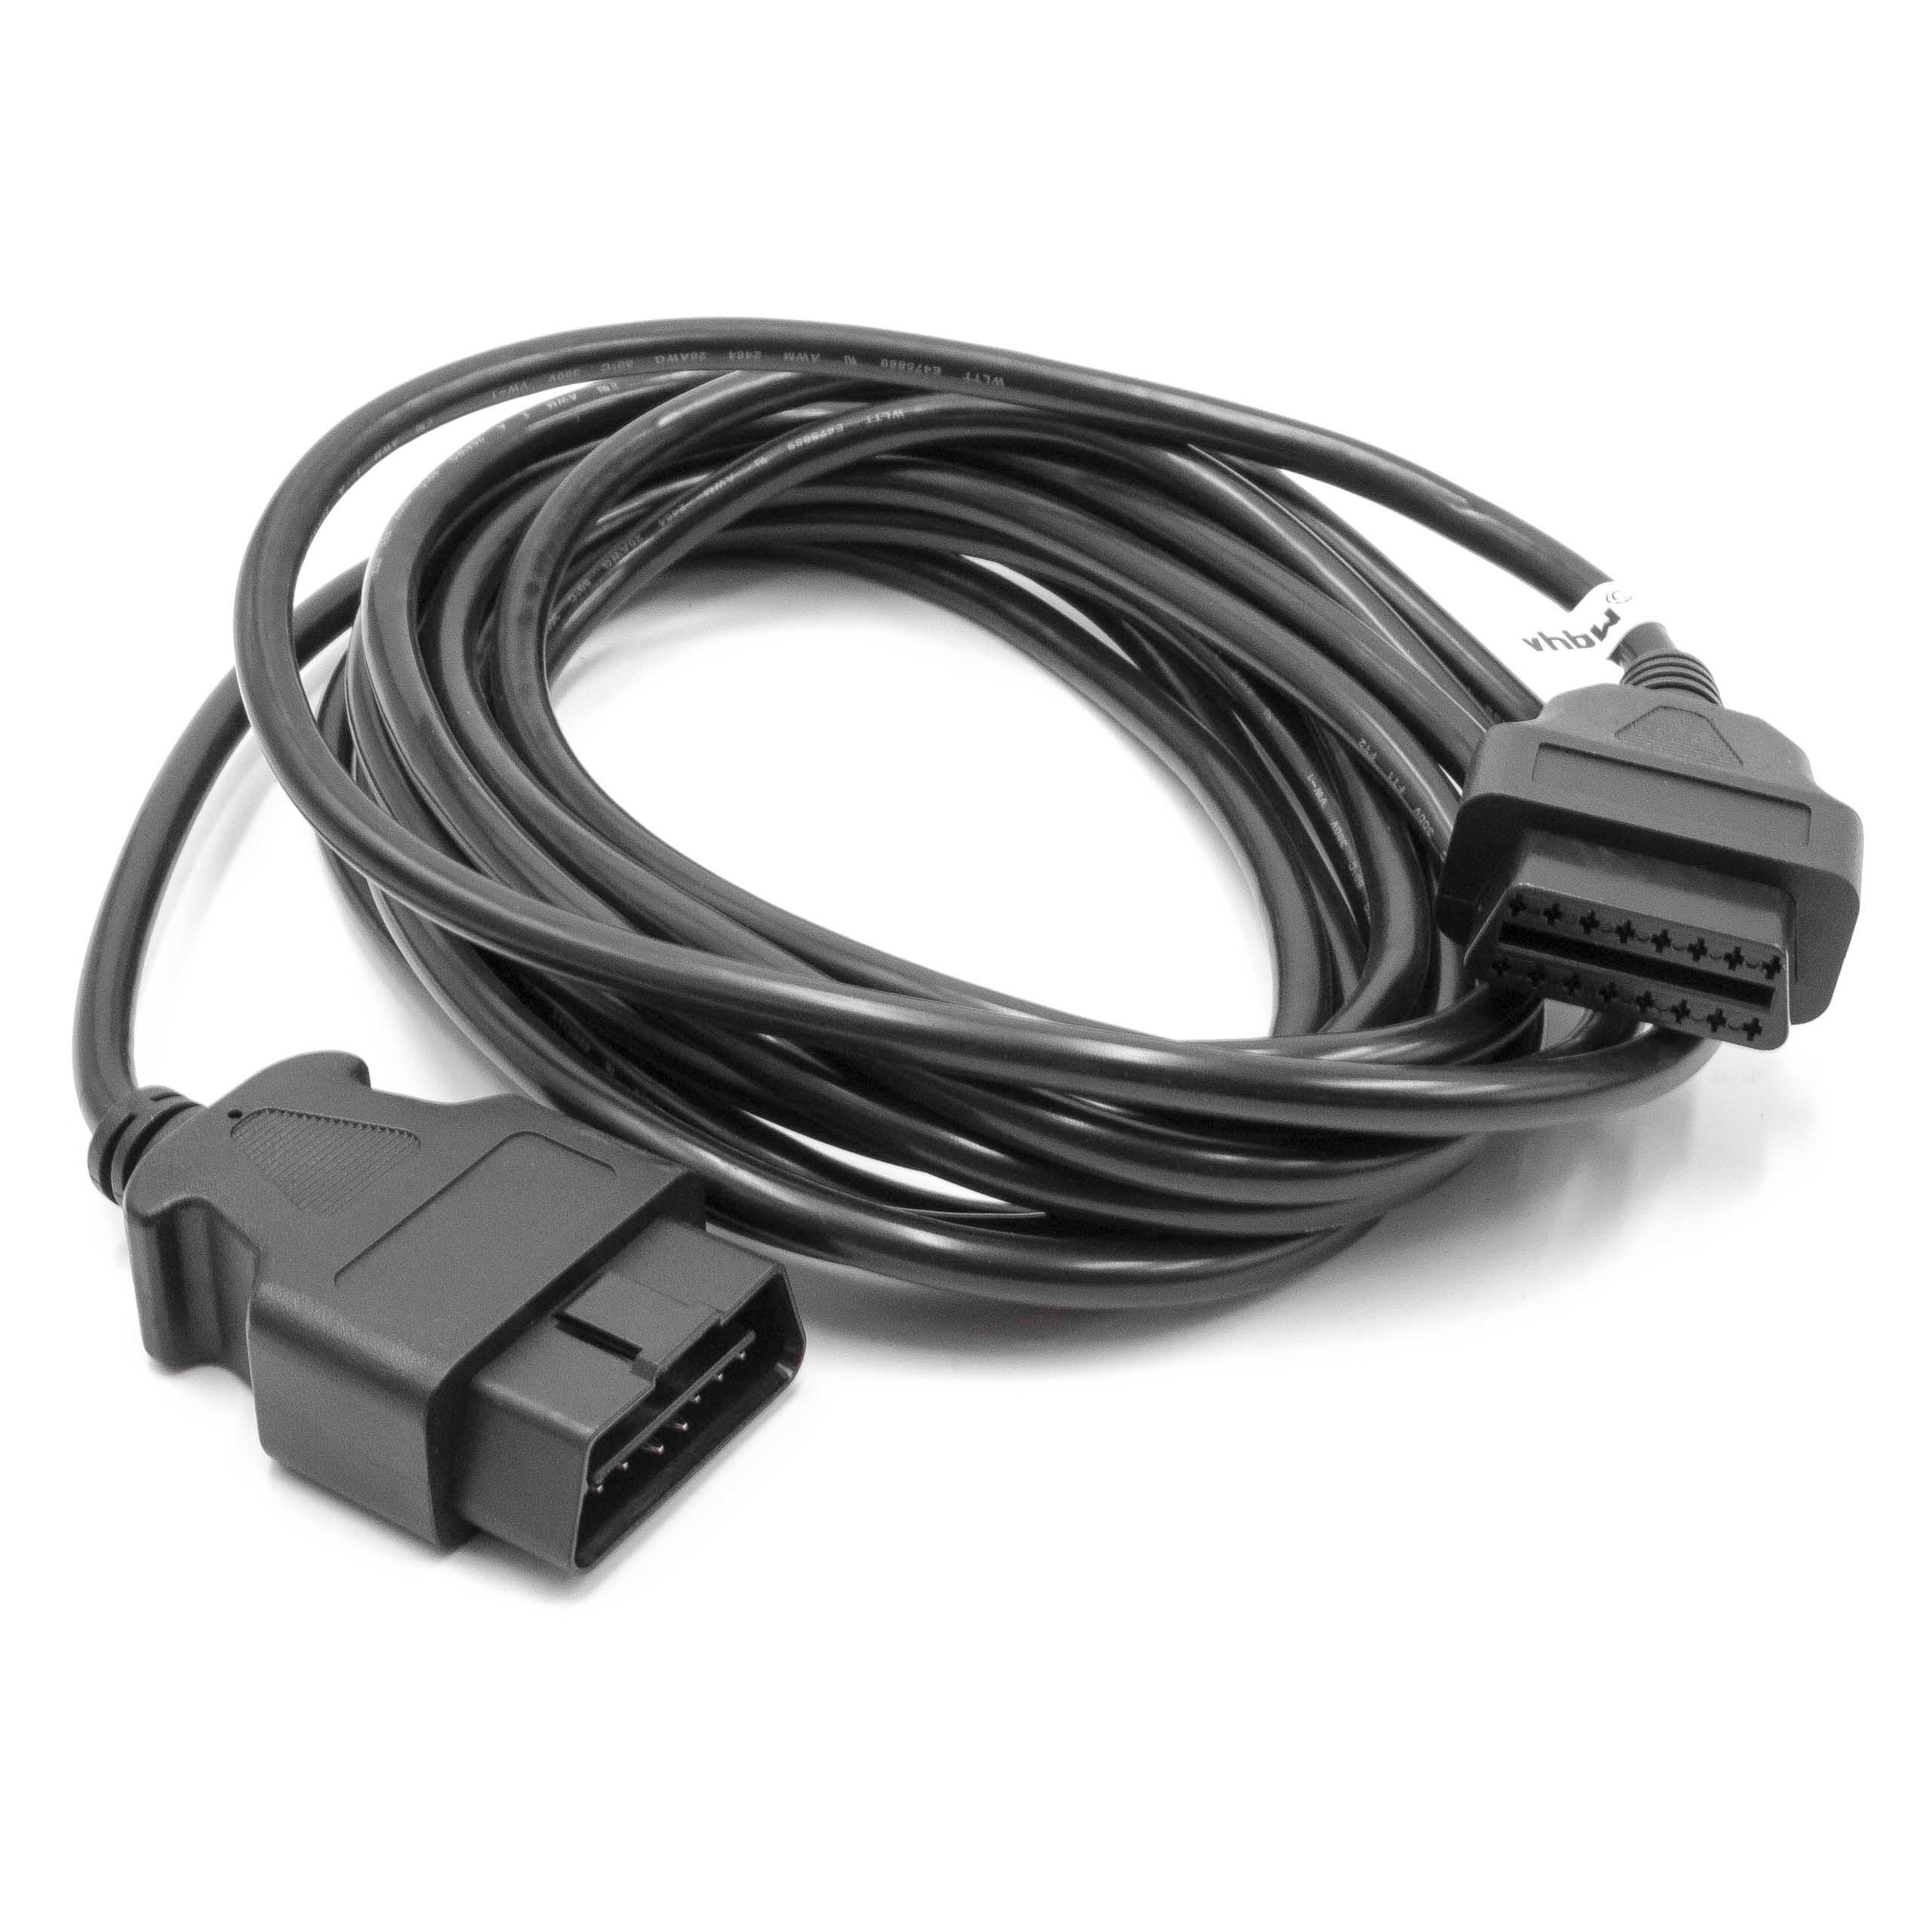 vhbw OBD2 Extension Cable 16 Pin (f) to 16 Pin (m) for Vehicle - 500 cm